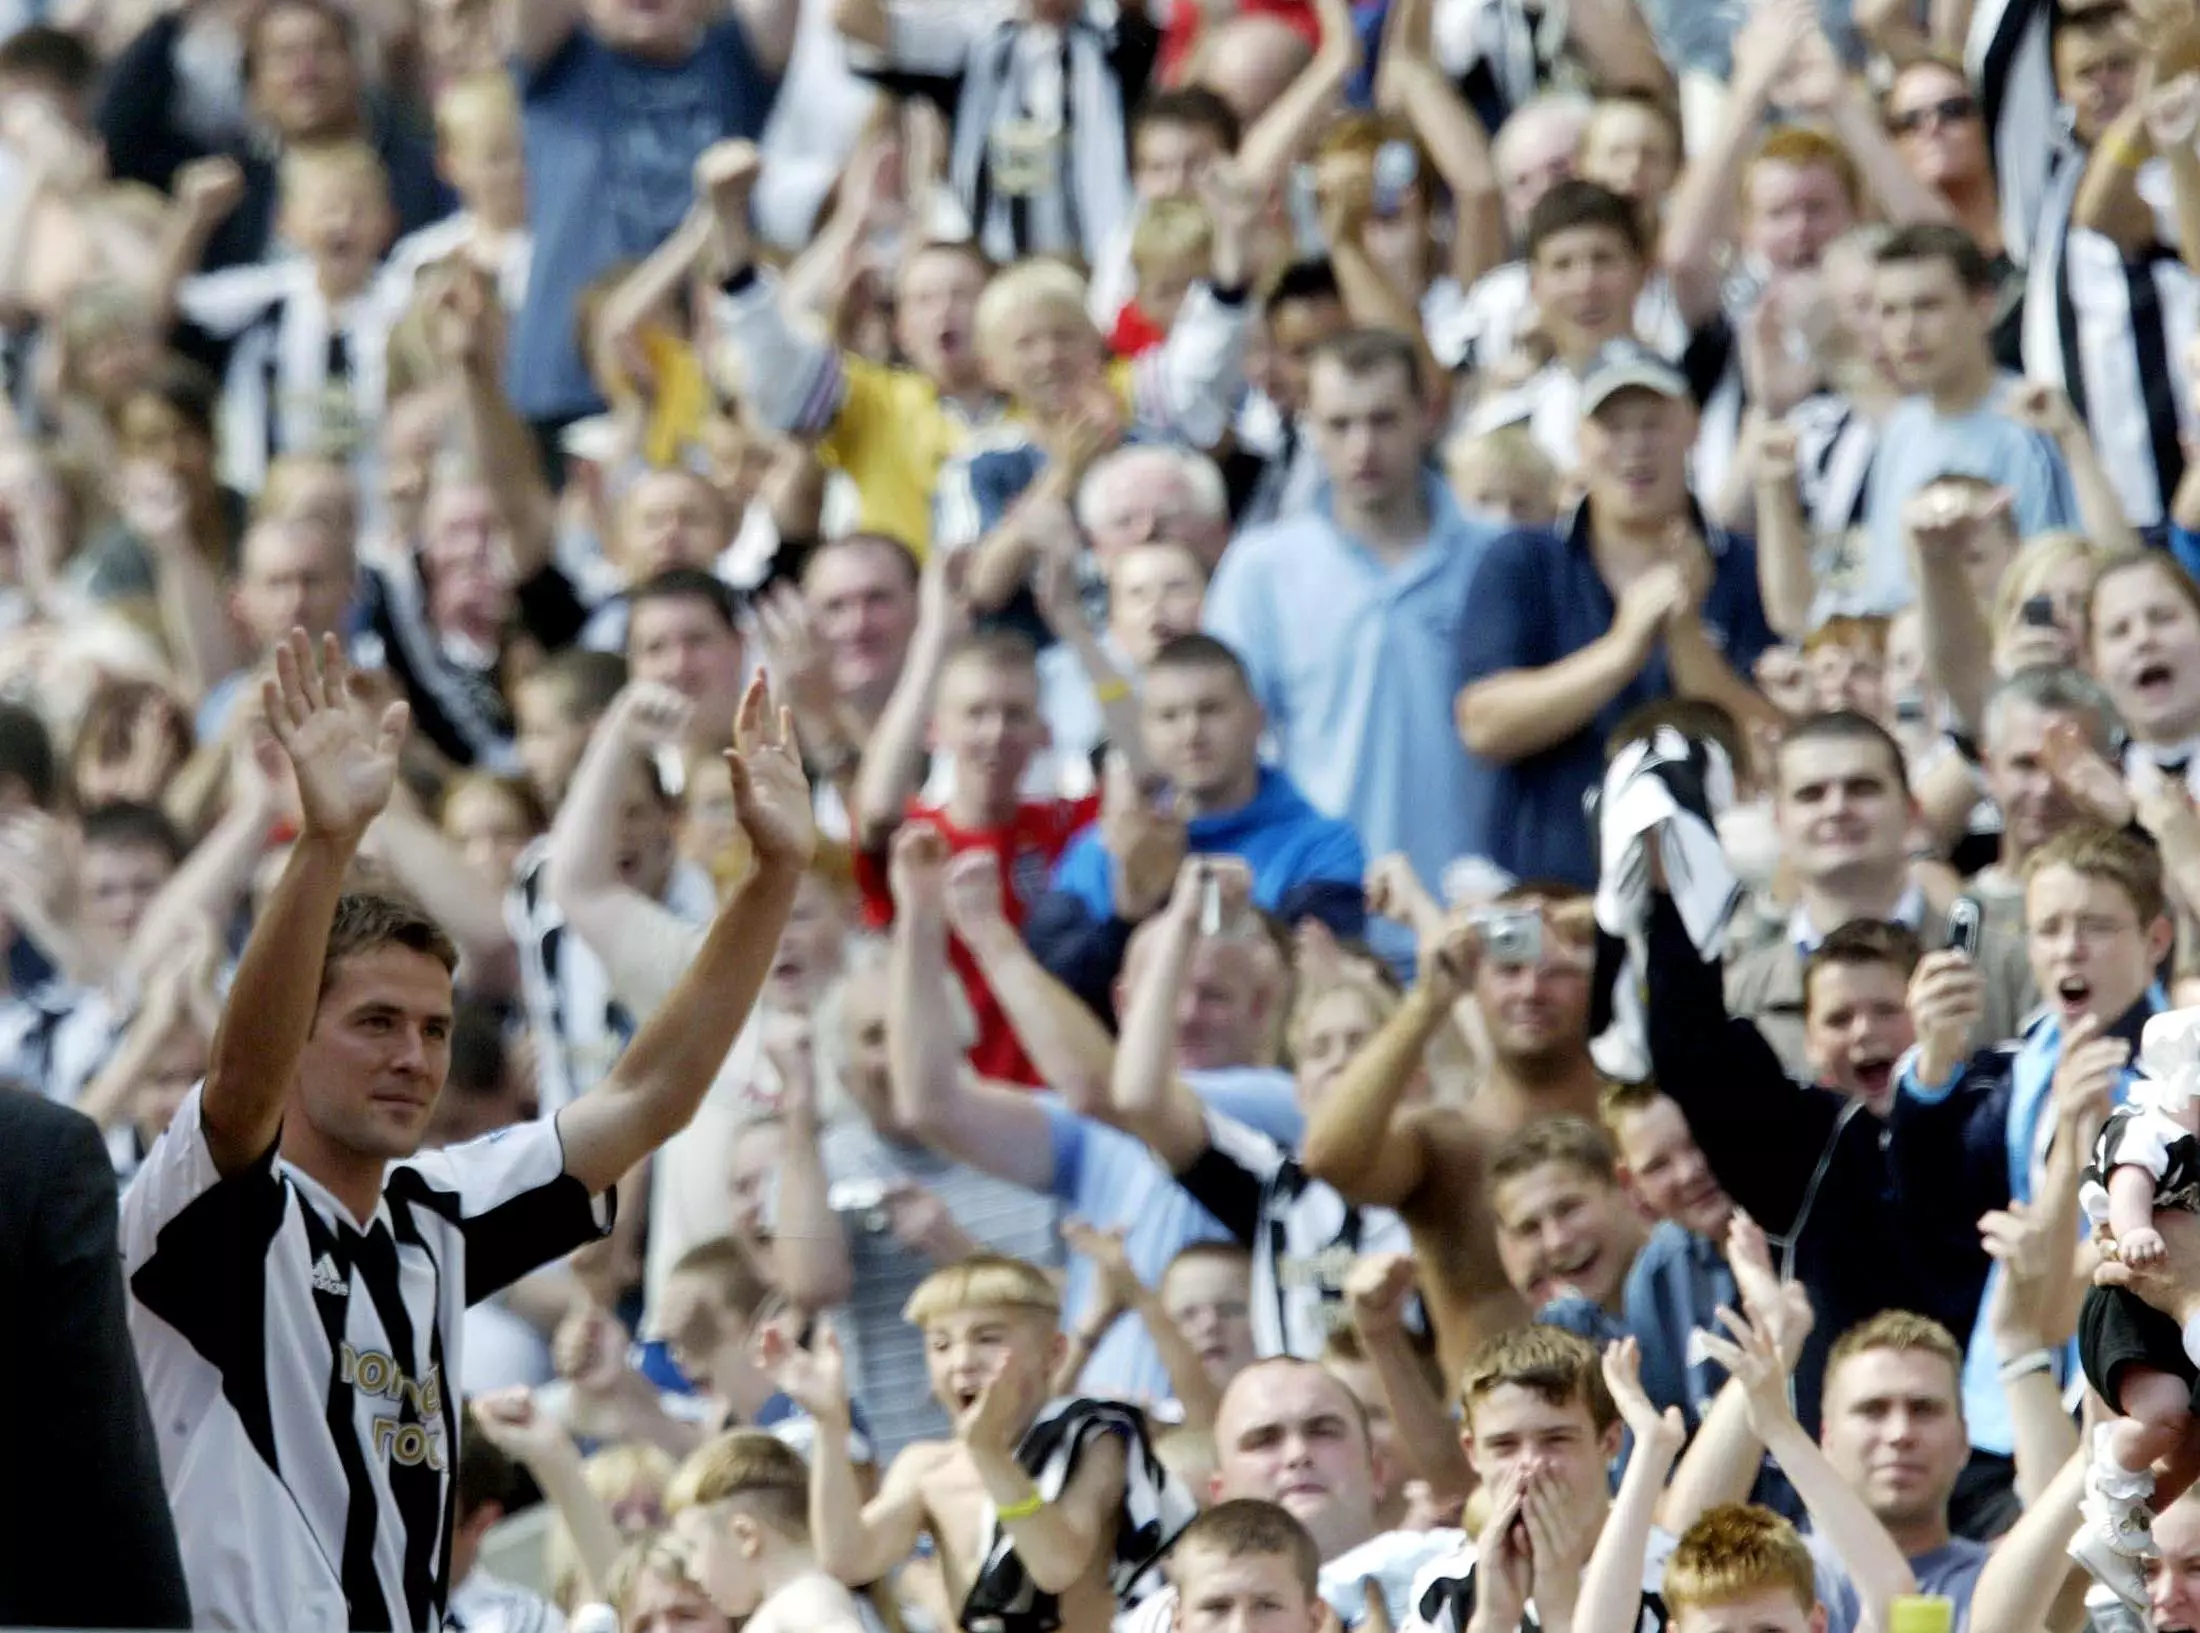 Newcastle fans were very happy to see Owen. Image: PA Images